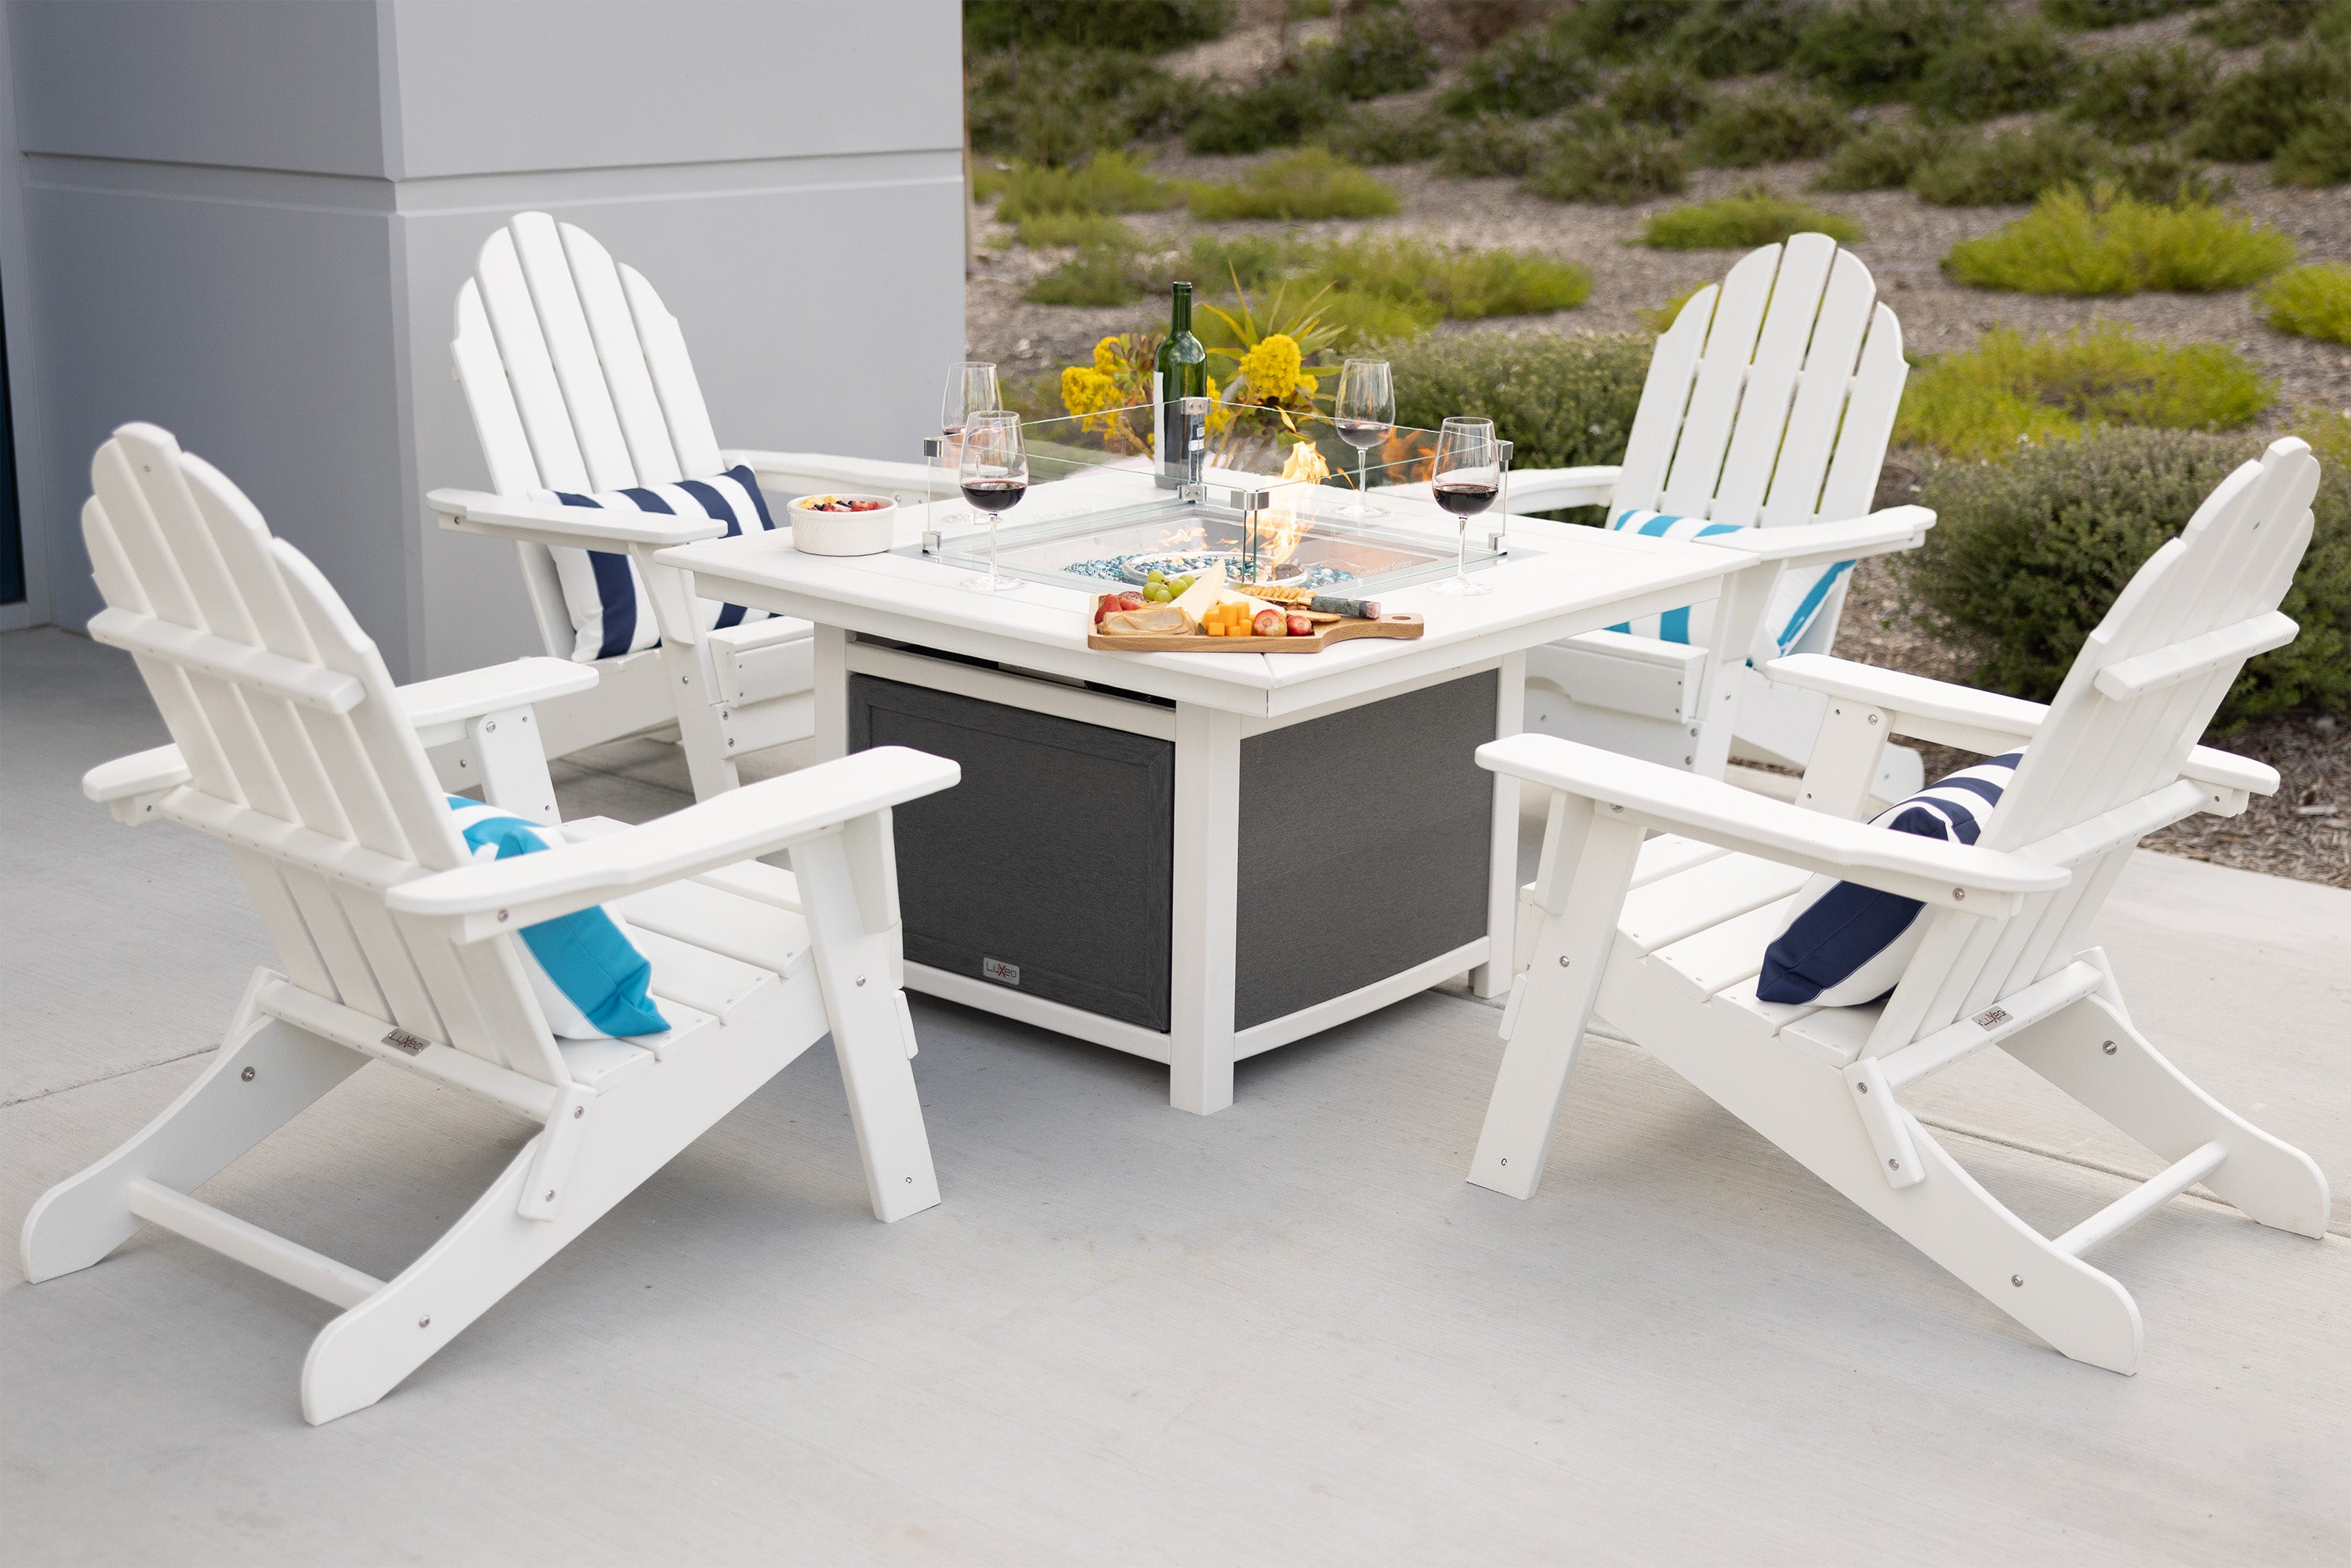 LuXeo Park City 42" Two-Tone Fire Pit Table, Square Top with Four Balboa Chairs